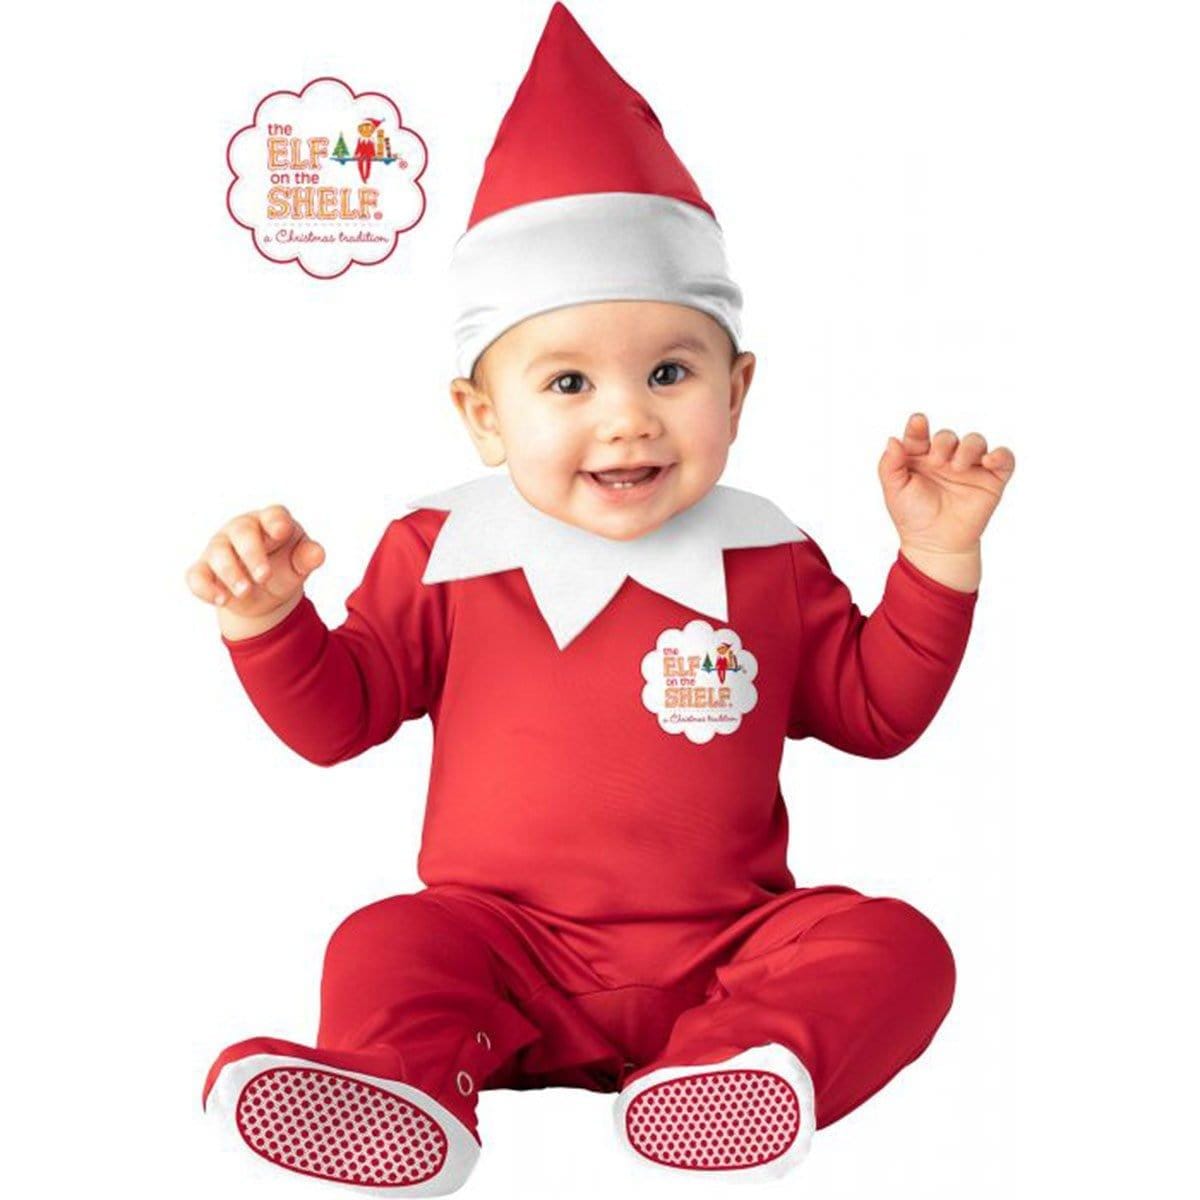 Buy Christmas Elf Costume for Toddlers, Elf On The Shelf: A Christmas Tradition sold at Party Expert